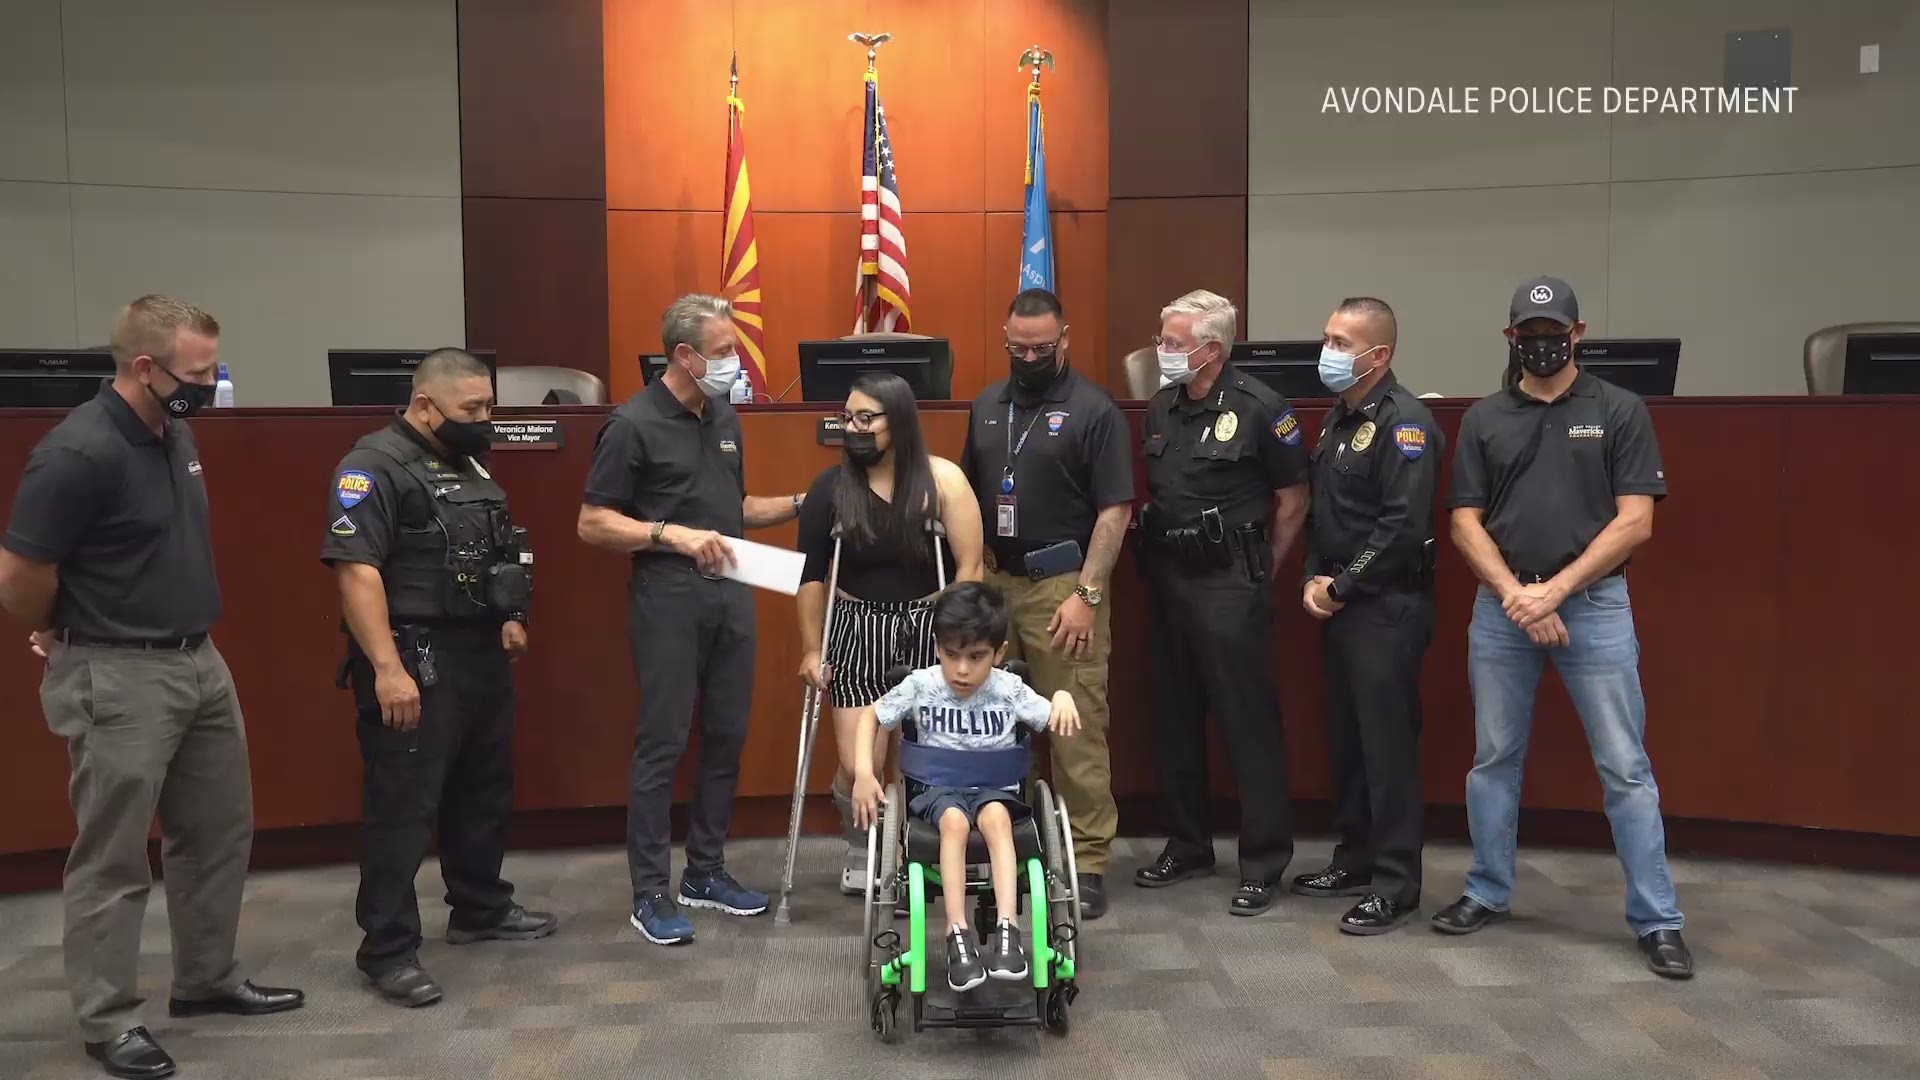 After hearing about Eli's stolen wheelchair, members of the local community and police department jumped in to help him out.